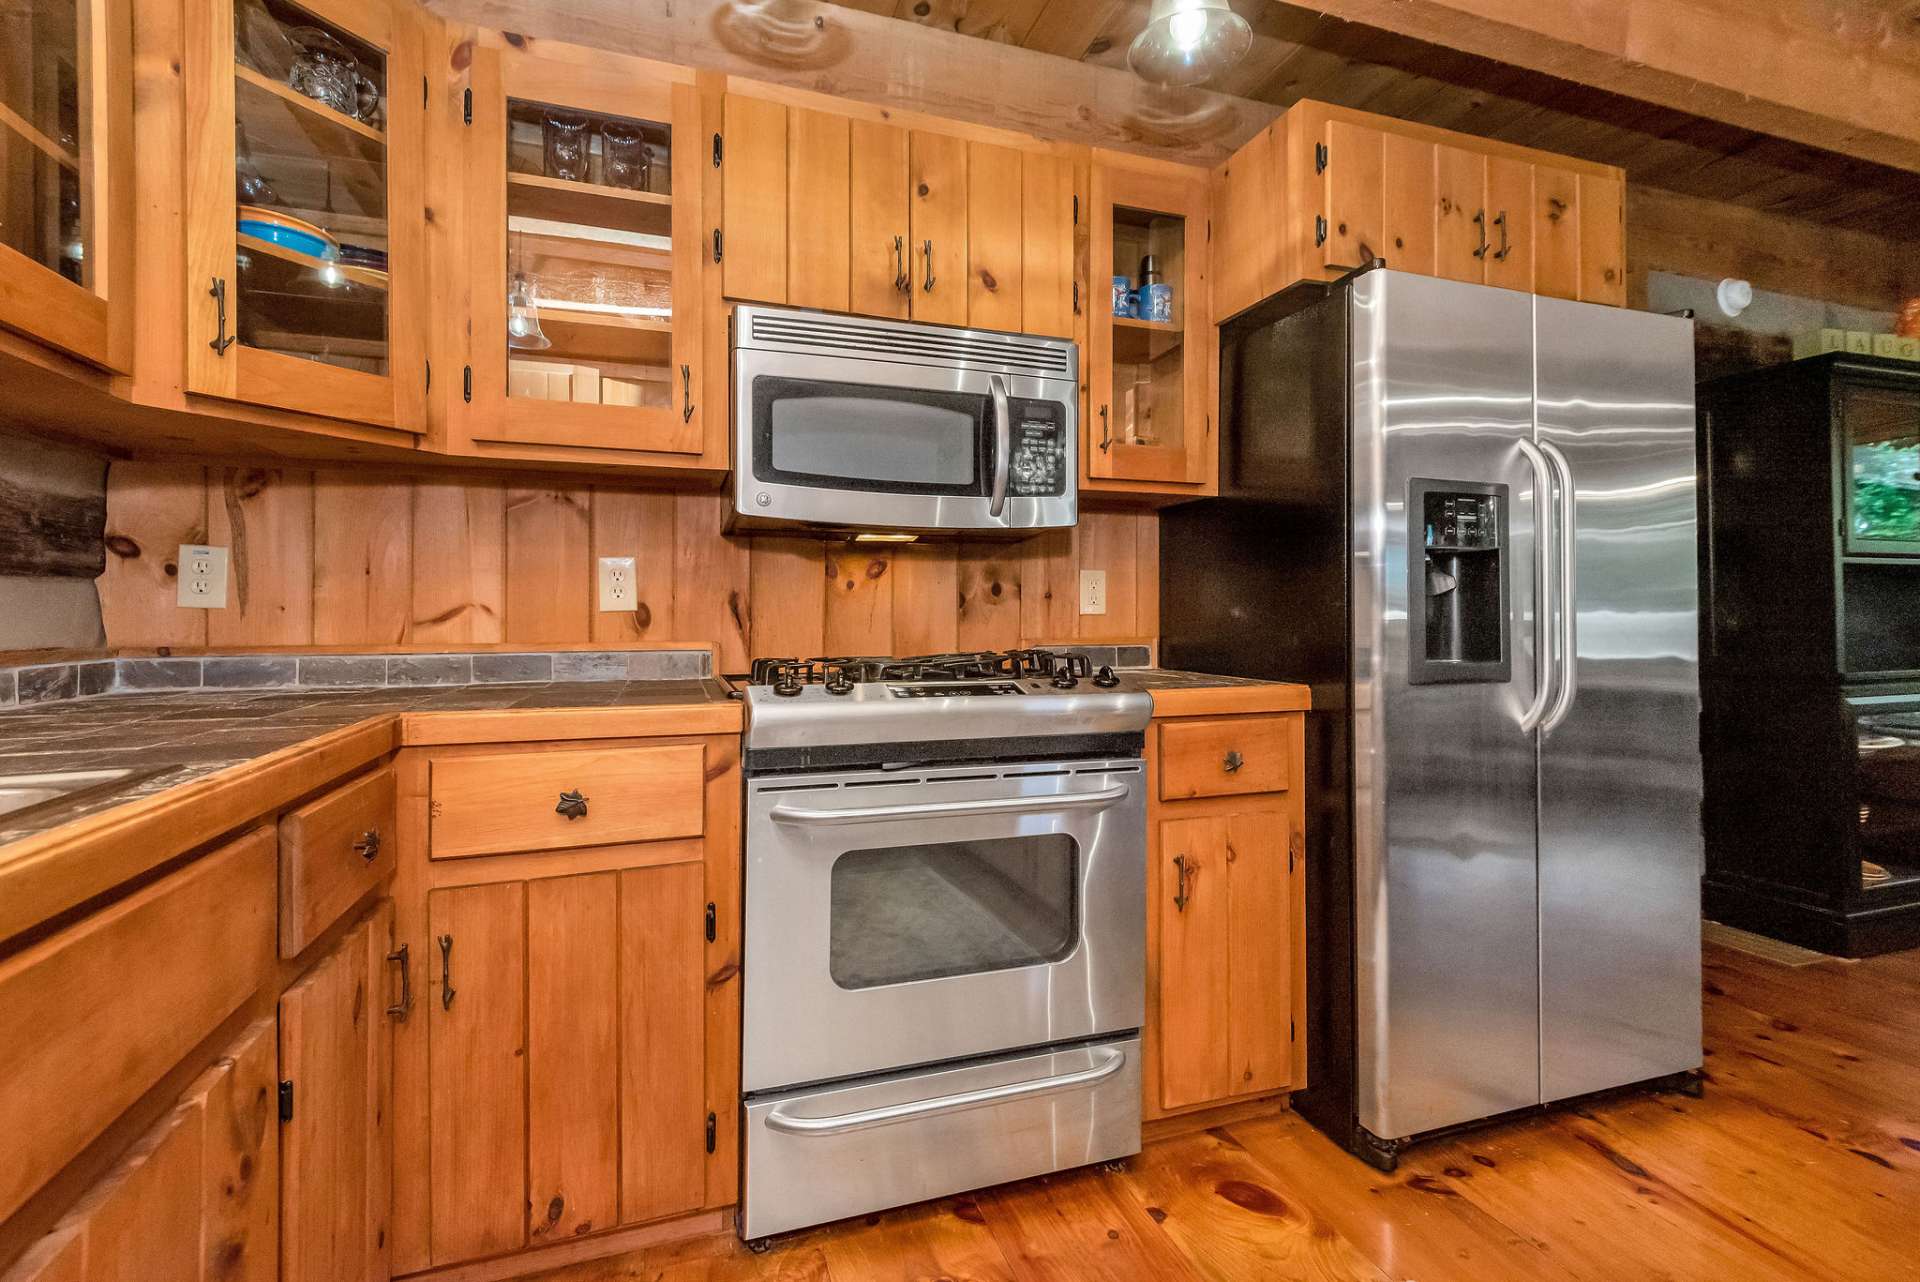 Enjoy stainless appliances, including a gas range.